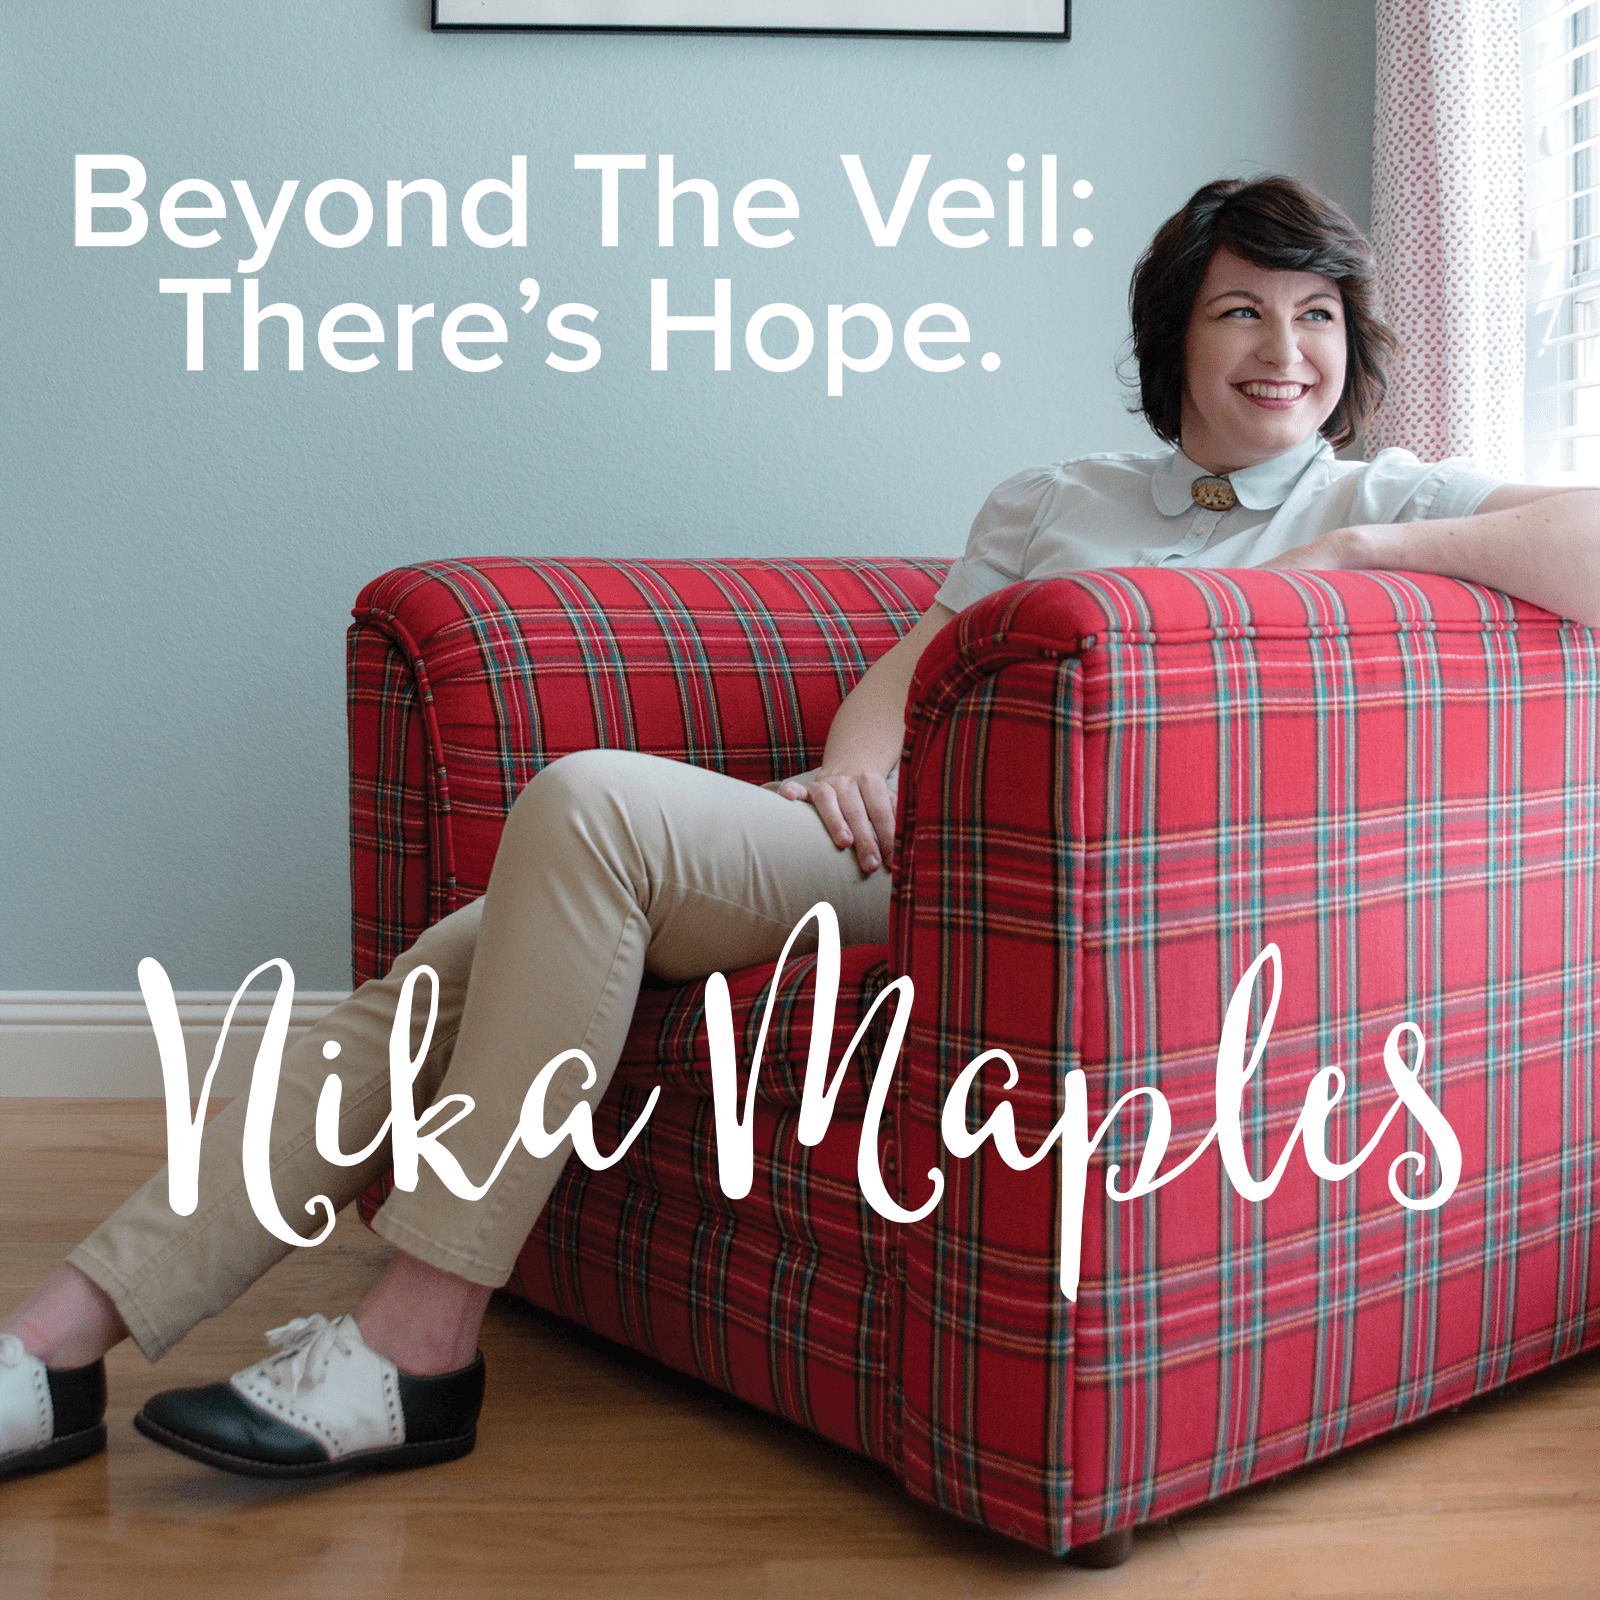 Beyond The Veil - There's Hope Image